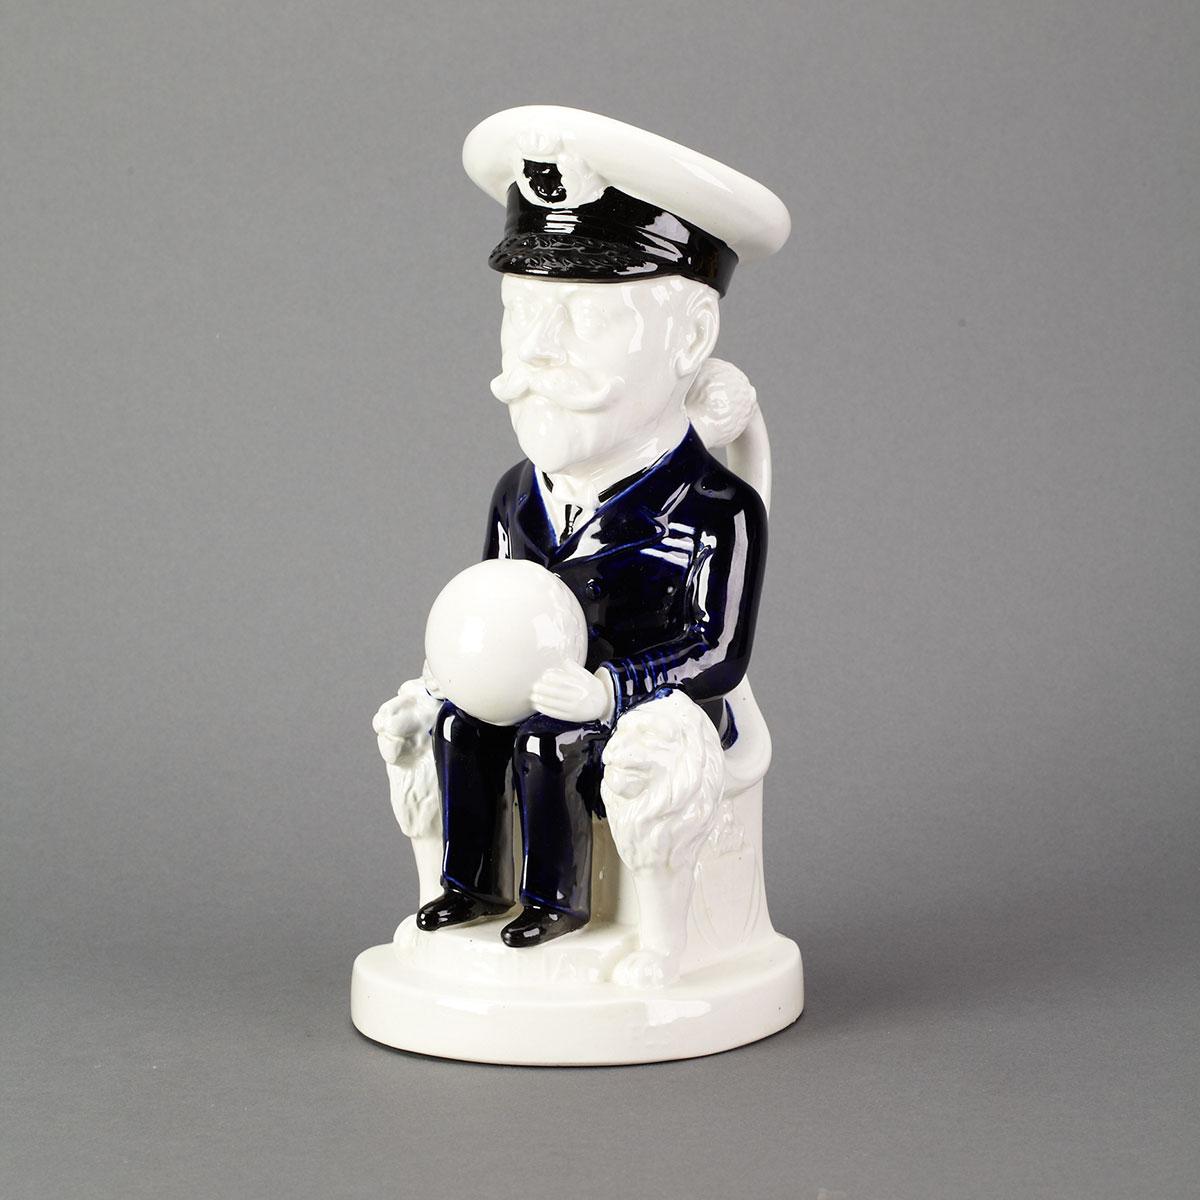 Wilkinson ‘King George V’ Toby Jug, Sir Francis Carruthers Gould, 1919